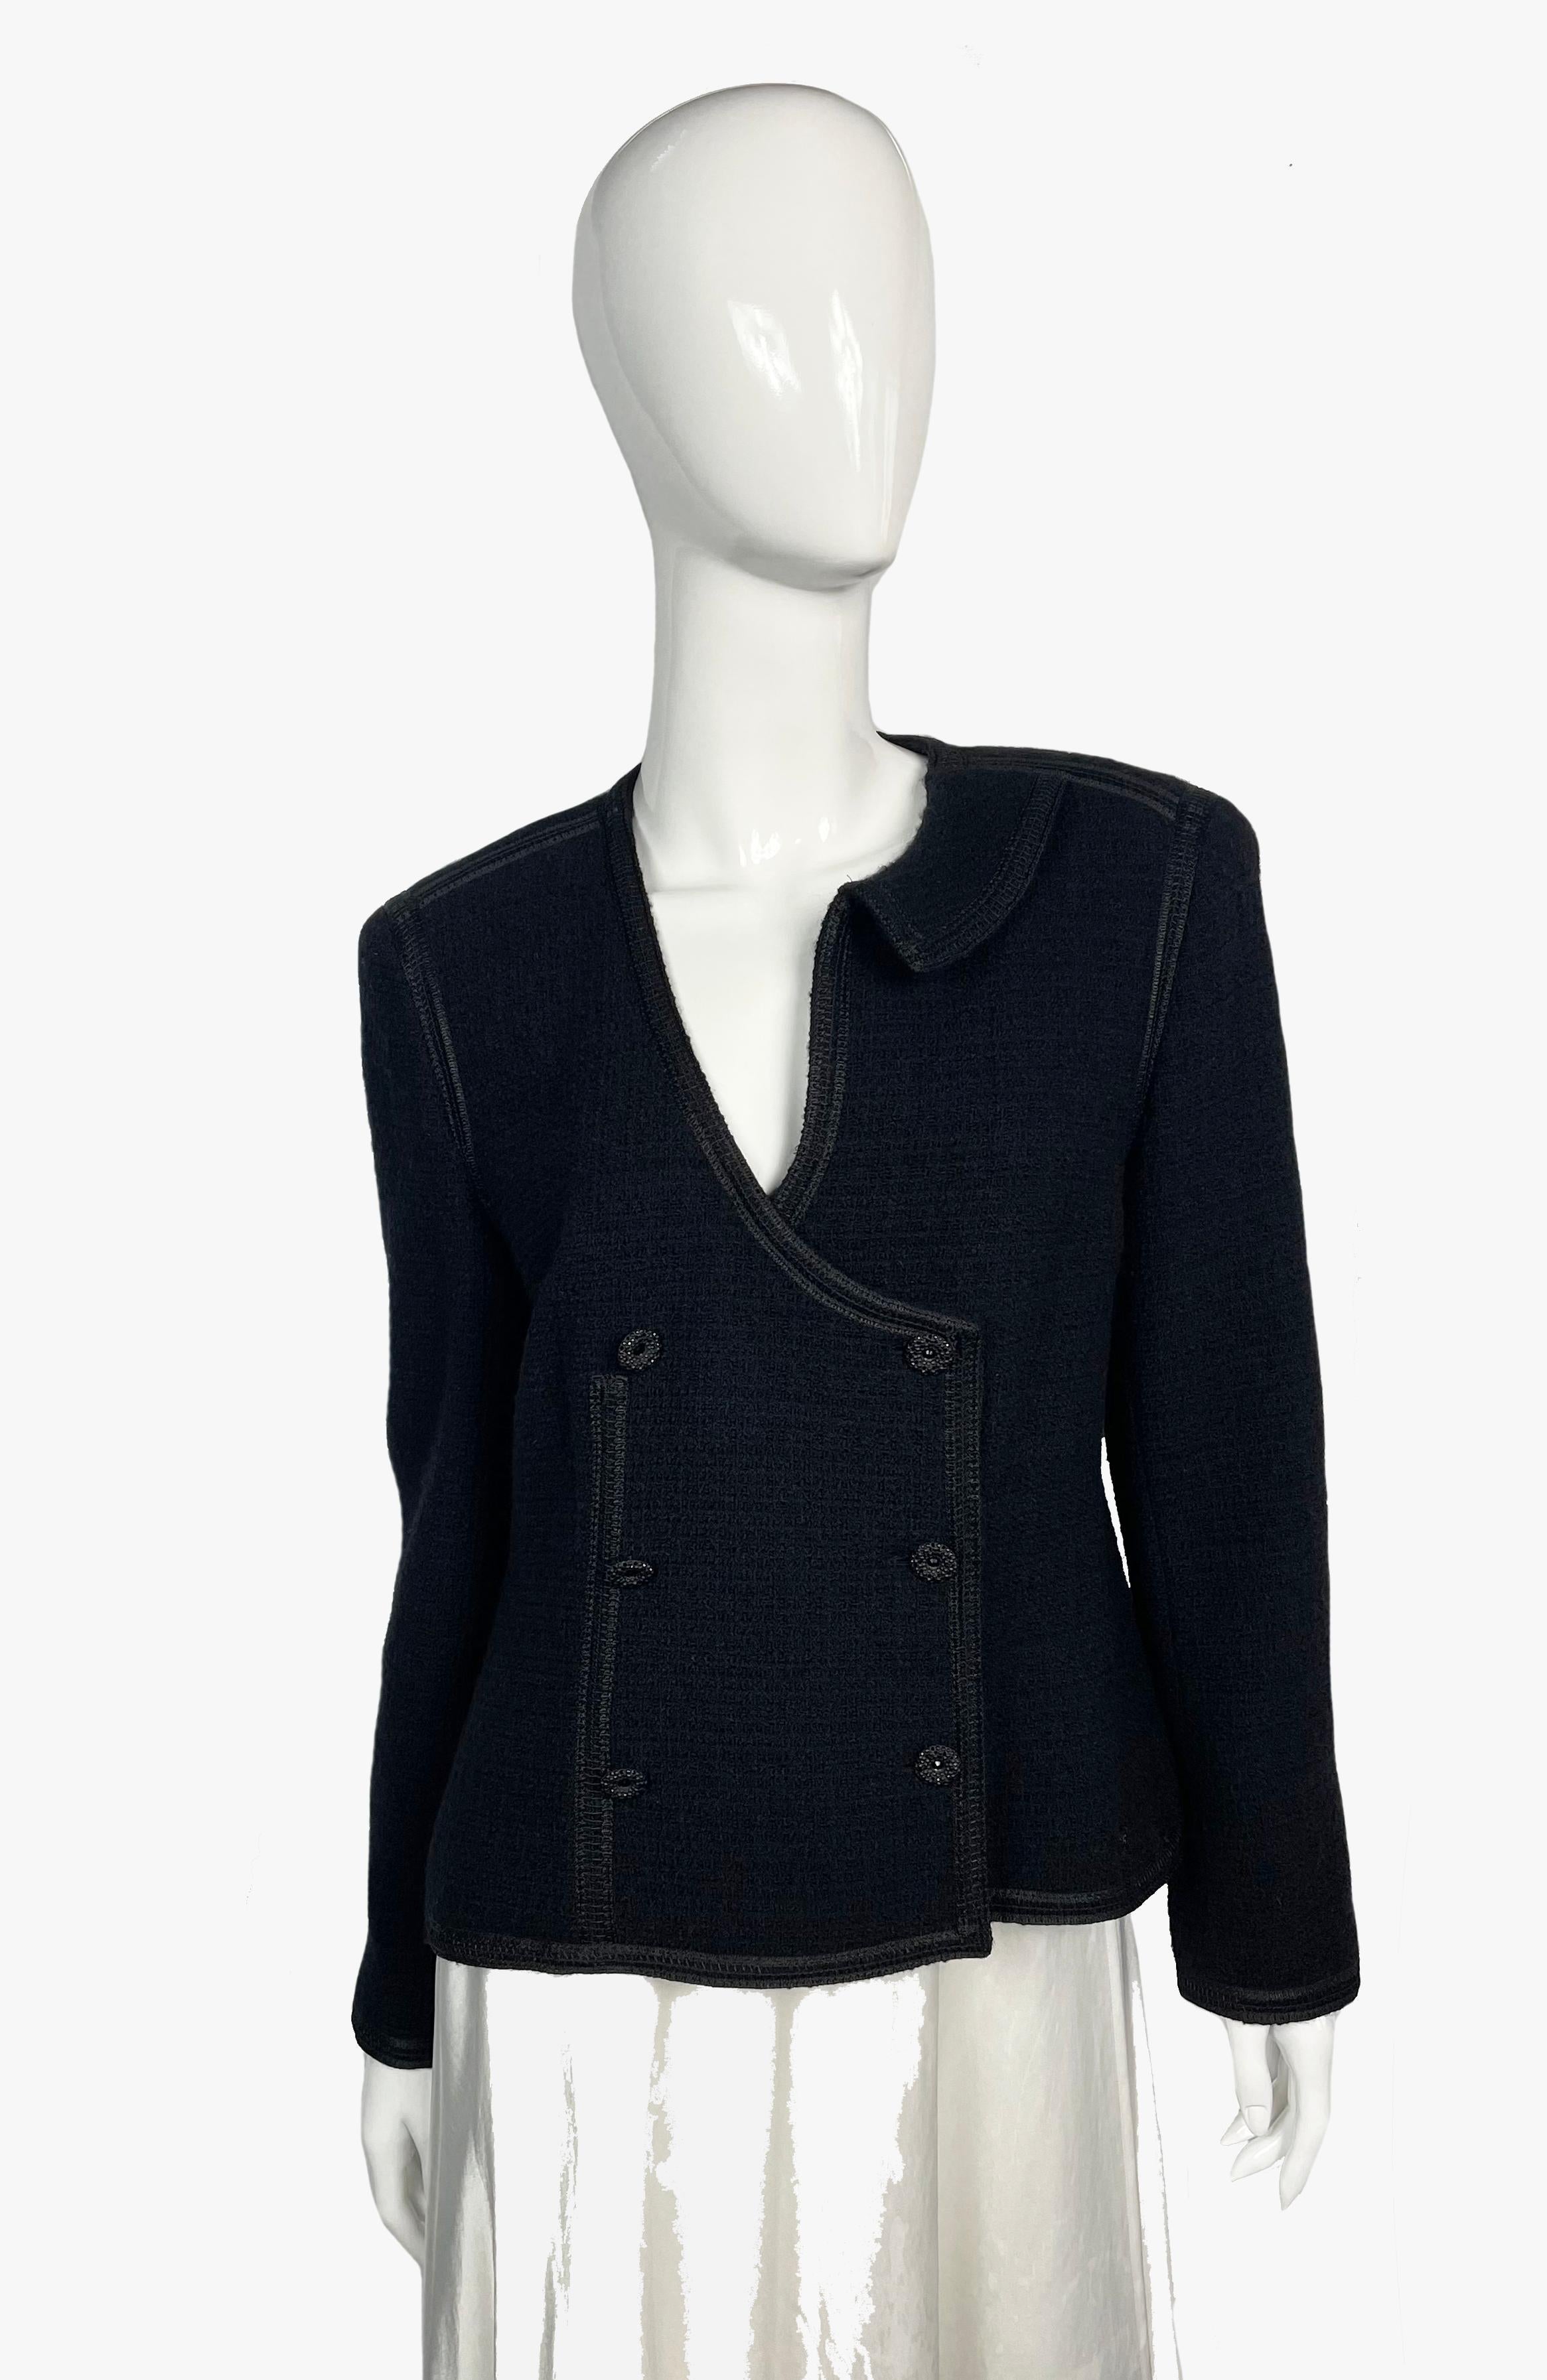 Vintage Chanel black wool evening jacket from the Cruise 2002 Collection by Karl Lagerfeld. Collarless. Button closure. 
Size: L
Bust: 91cm
Length: 57cm
Sleeve: 67cm

Composition: 85% wool, 15% angora; lining: 95% silk, 5%